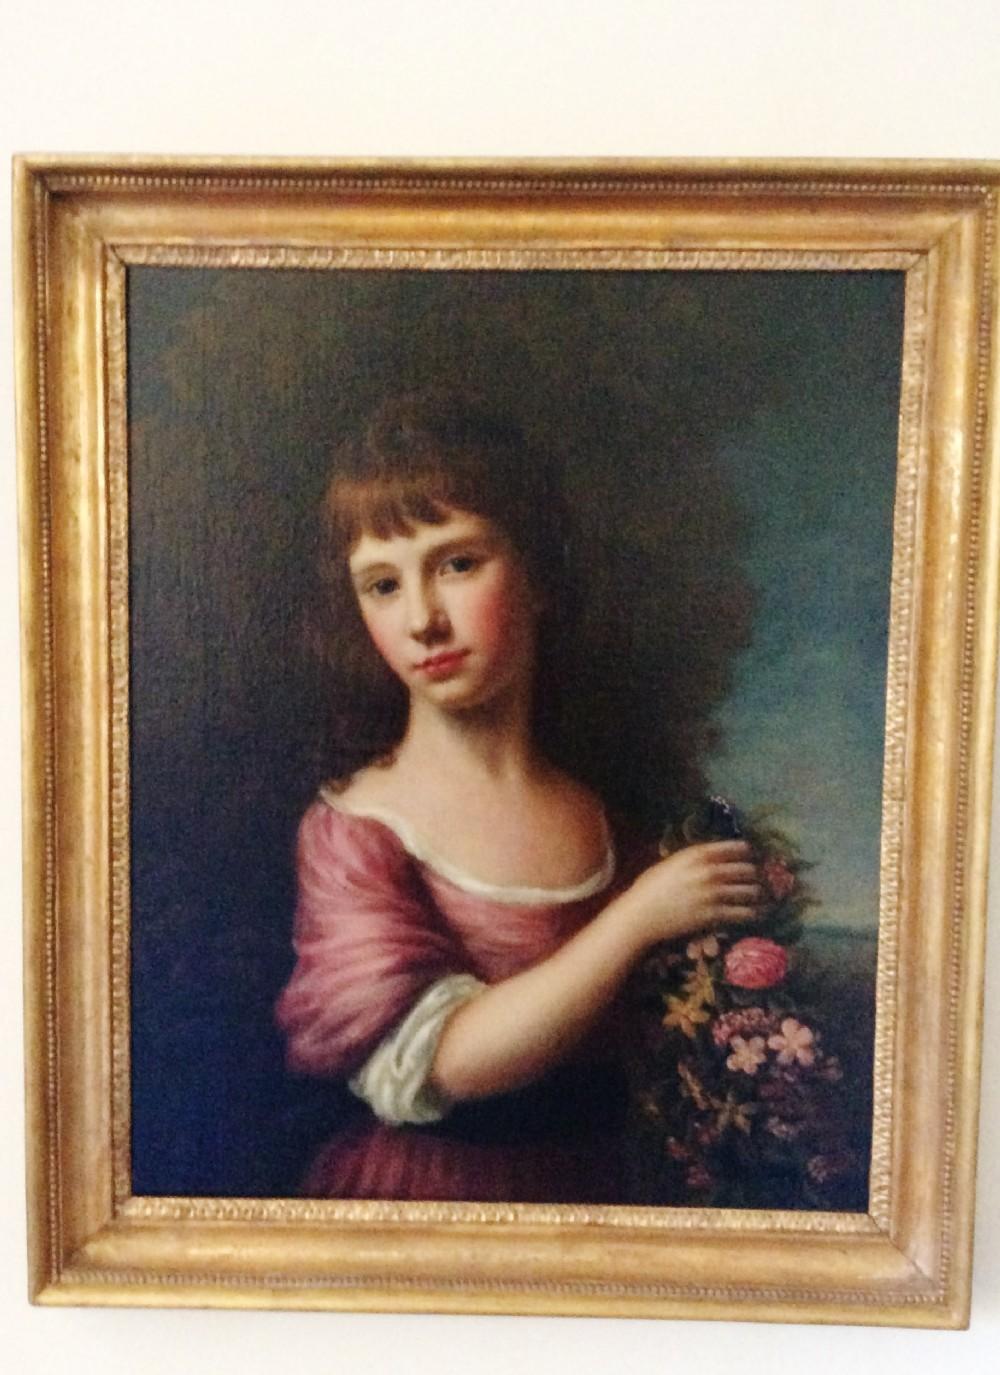 I have great pleasure in offering for sale this  beautiful  portrait, by Nathaniel Hone, the elder. 18th century. The painting is of  Ann Anderson, wife of Alexander Balmanno. She is  dressed  as 'Flora' , the roman goddess of spring.
Wearing a rose